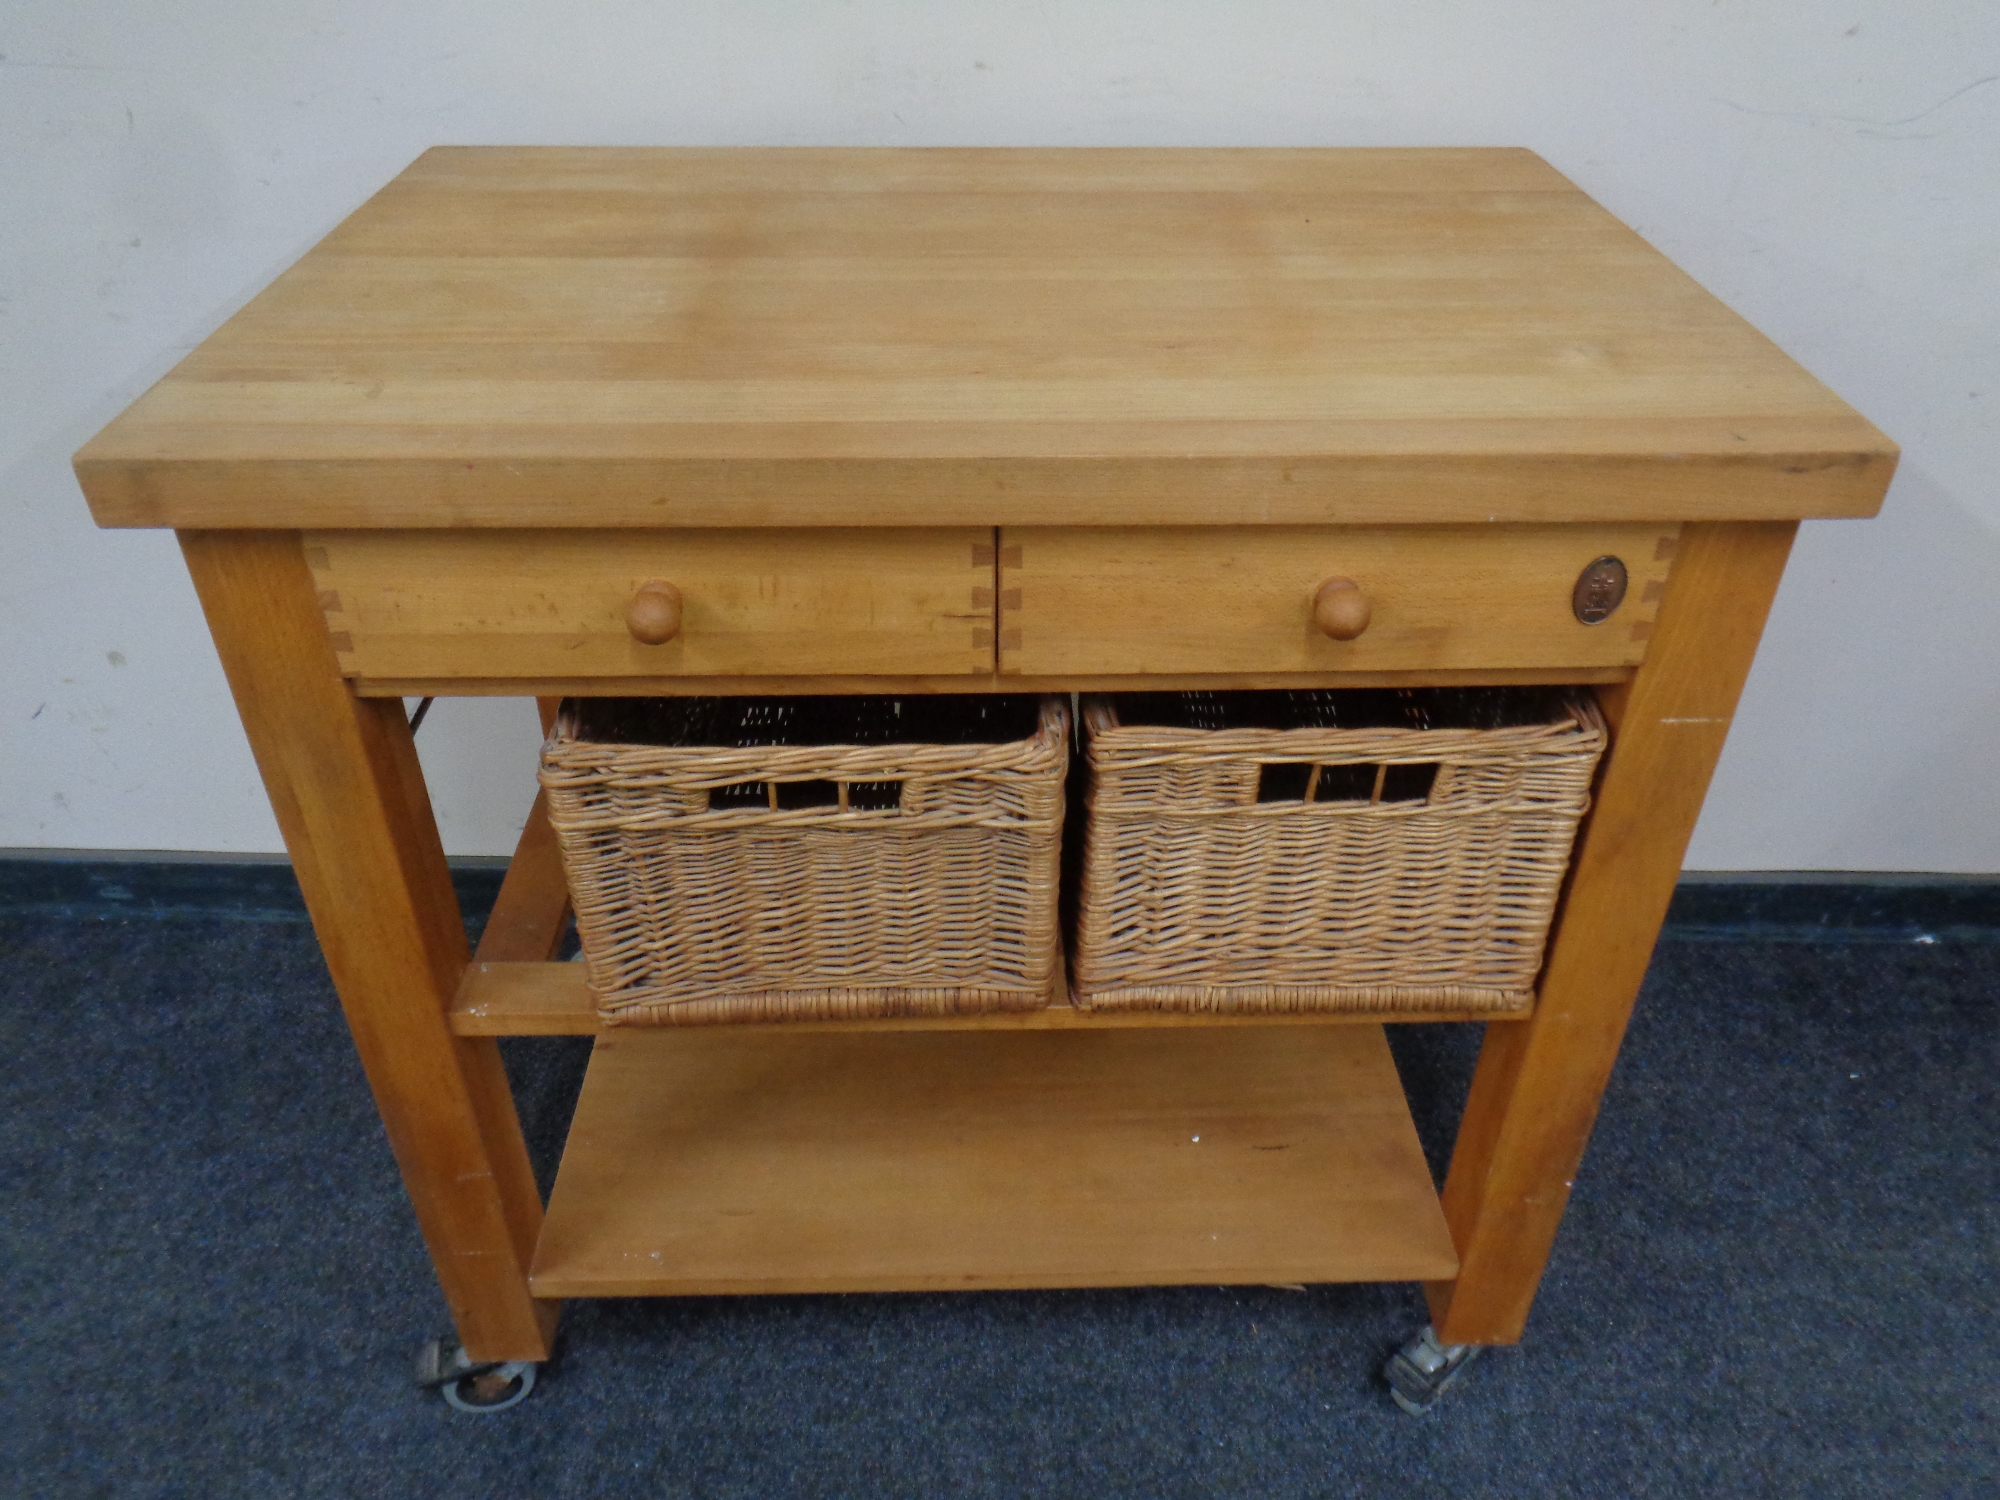 A pine kitchen island with drawers and storage baskets beneath